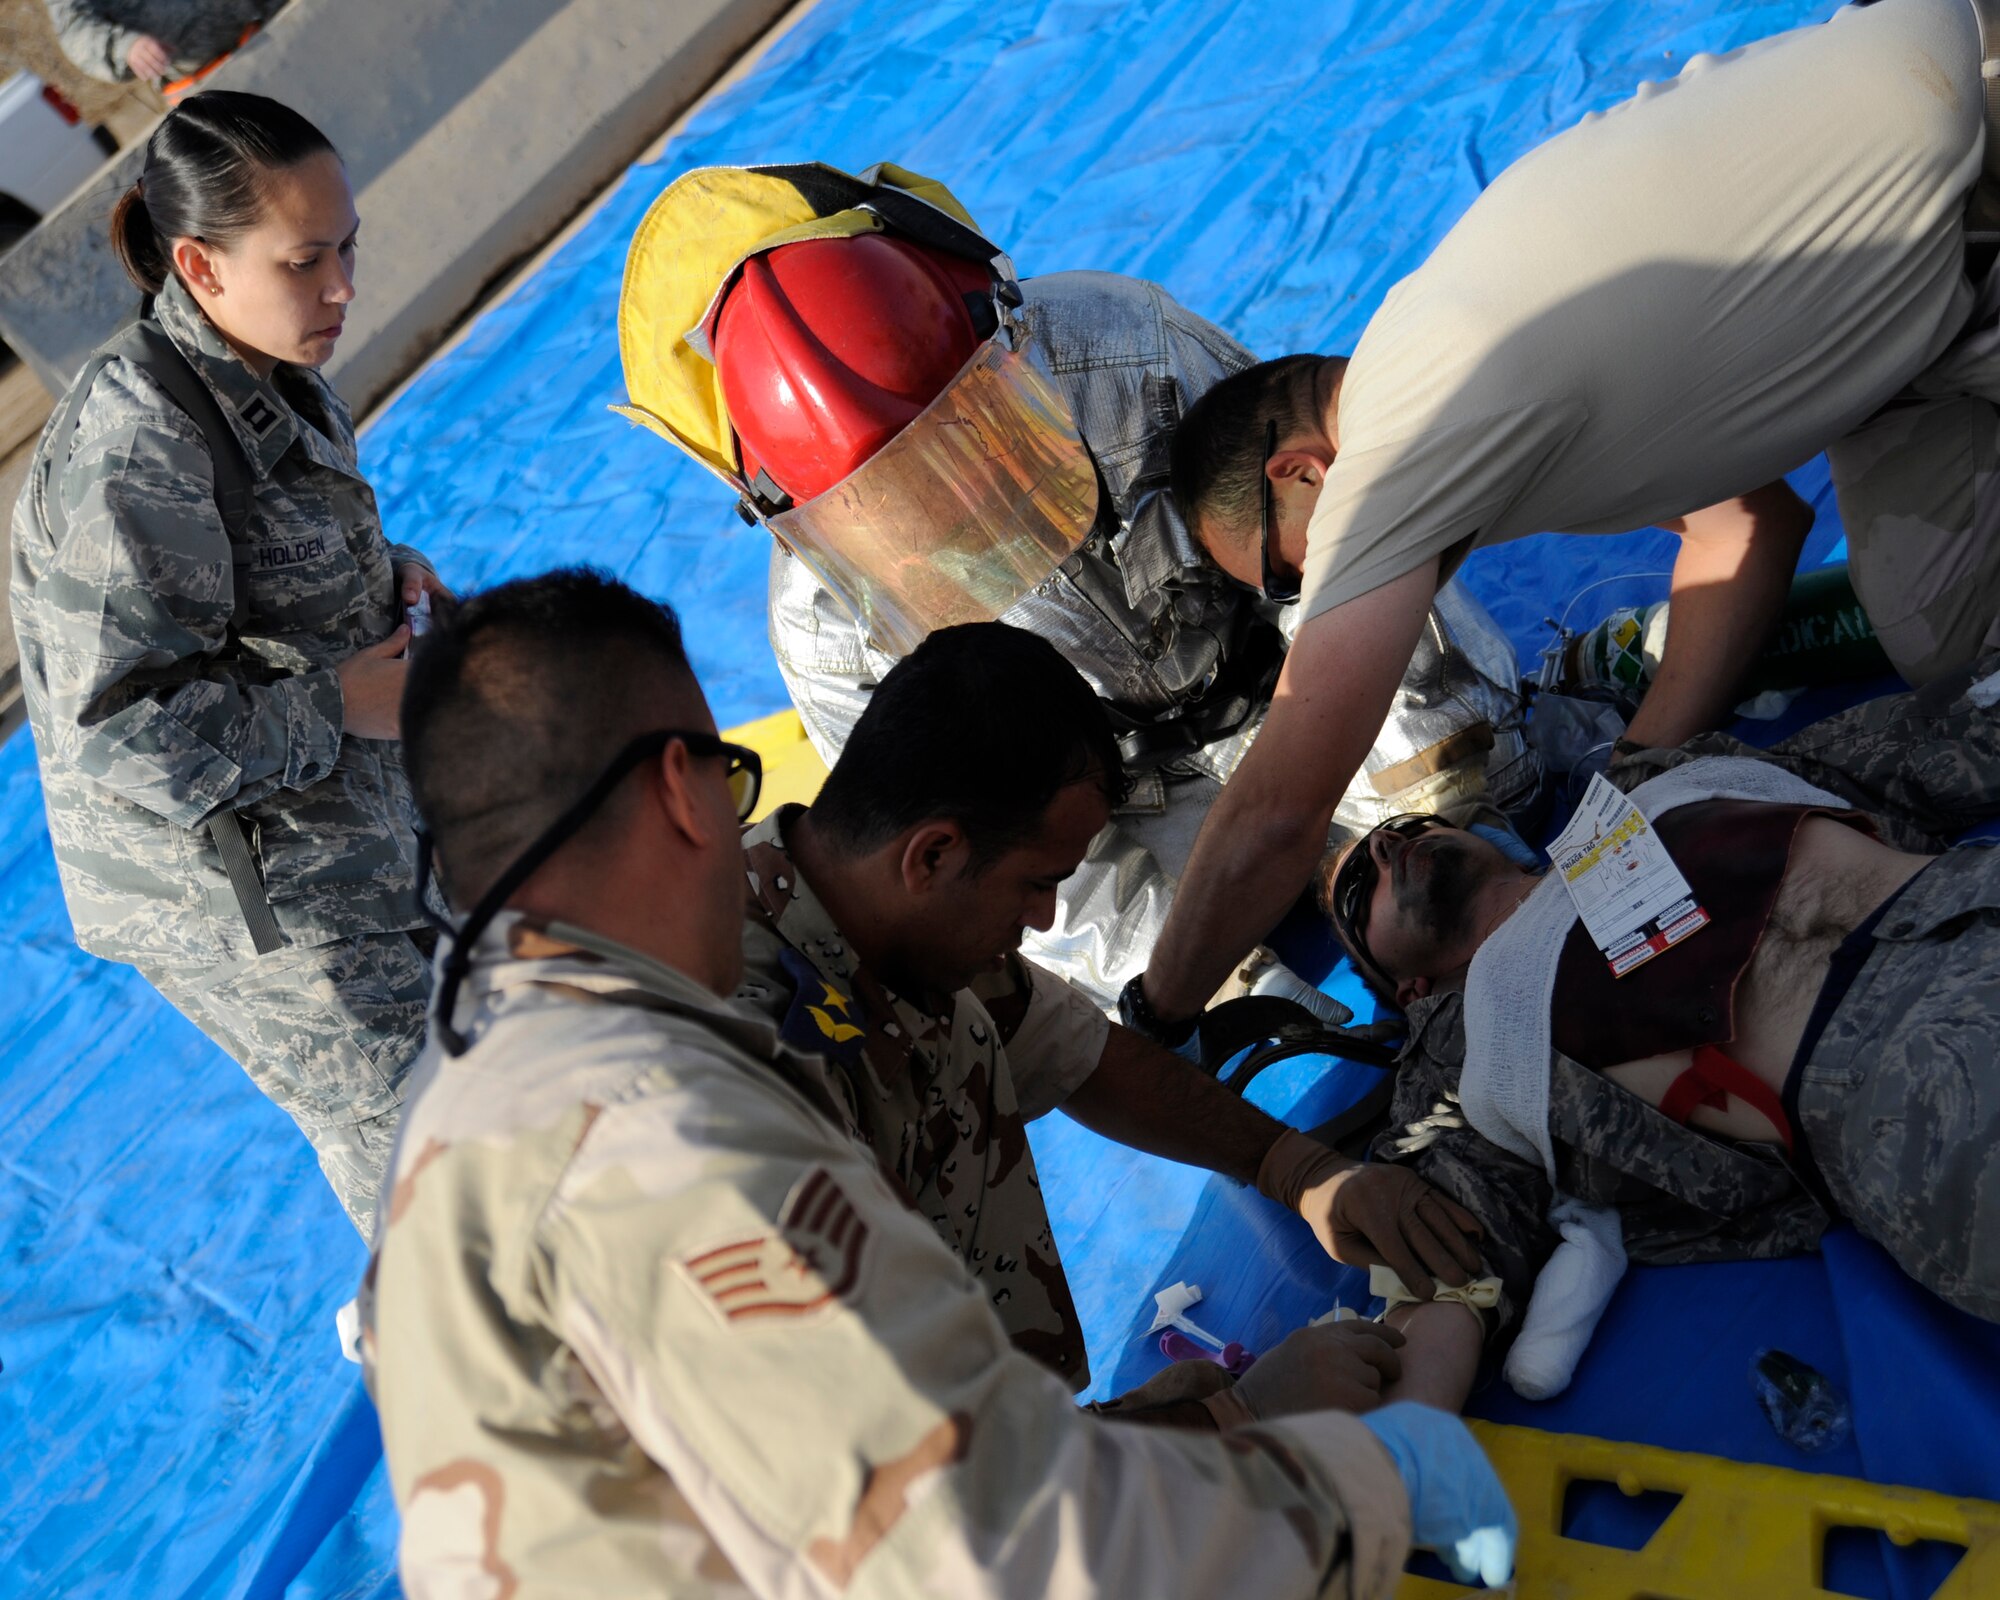 Capt. Sunny Holden, left, chief medical advisor for the 321st Air Expeditionary Advisory Squadron, watches over U.S. and Iraqi emergency response personnel as they provide medical care to a mock casualty of a C-130 accident during a major accident response exercise at New Al-Muthana Air Base, Iraq on Nov. 21, 2008. Holden is deployed from the 1st Medical Operations Squadron, Langley Air Force Base, Va. (U.S. Air Force photo/Staff Sgt. Paul Villanueva II)